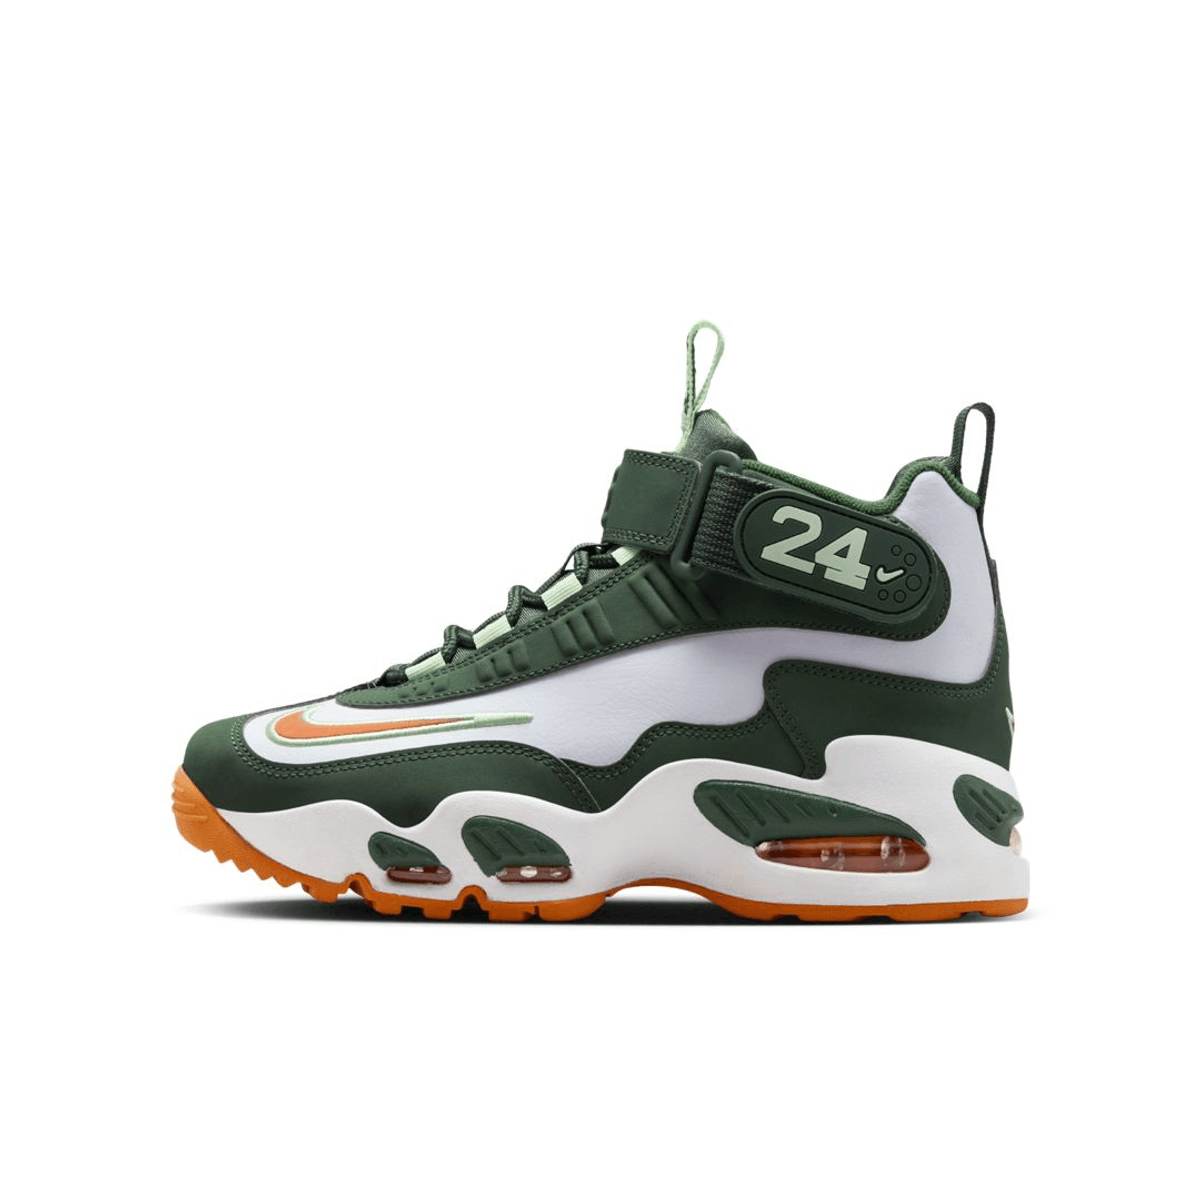 The Nike Air Griffey Max 1 GS “Miami Hurricanes” Releases Spring 2024